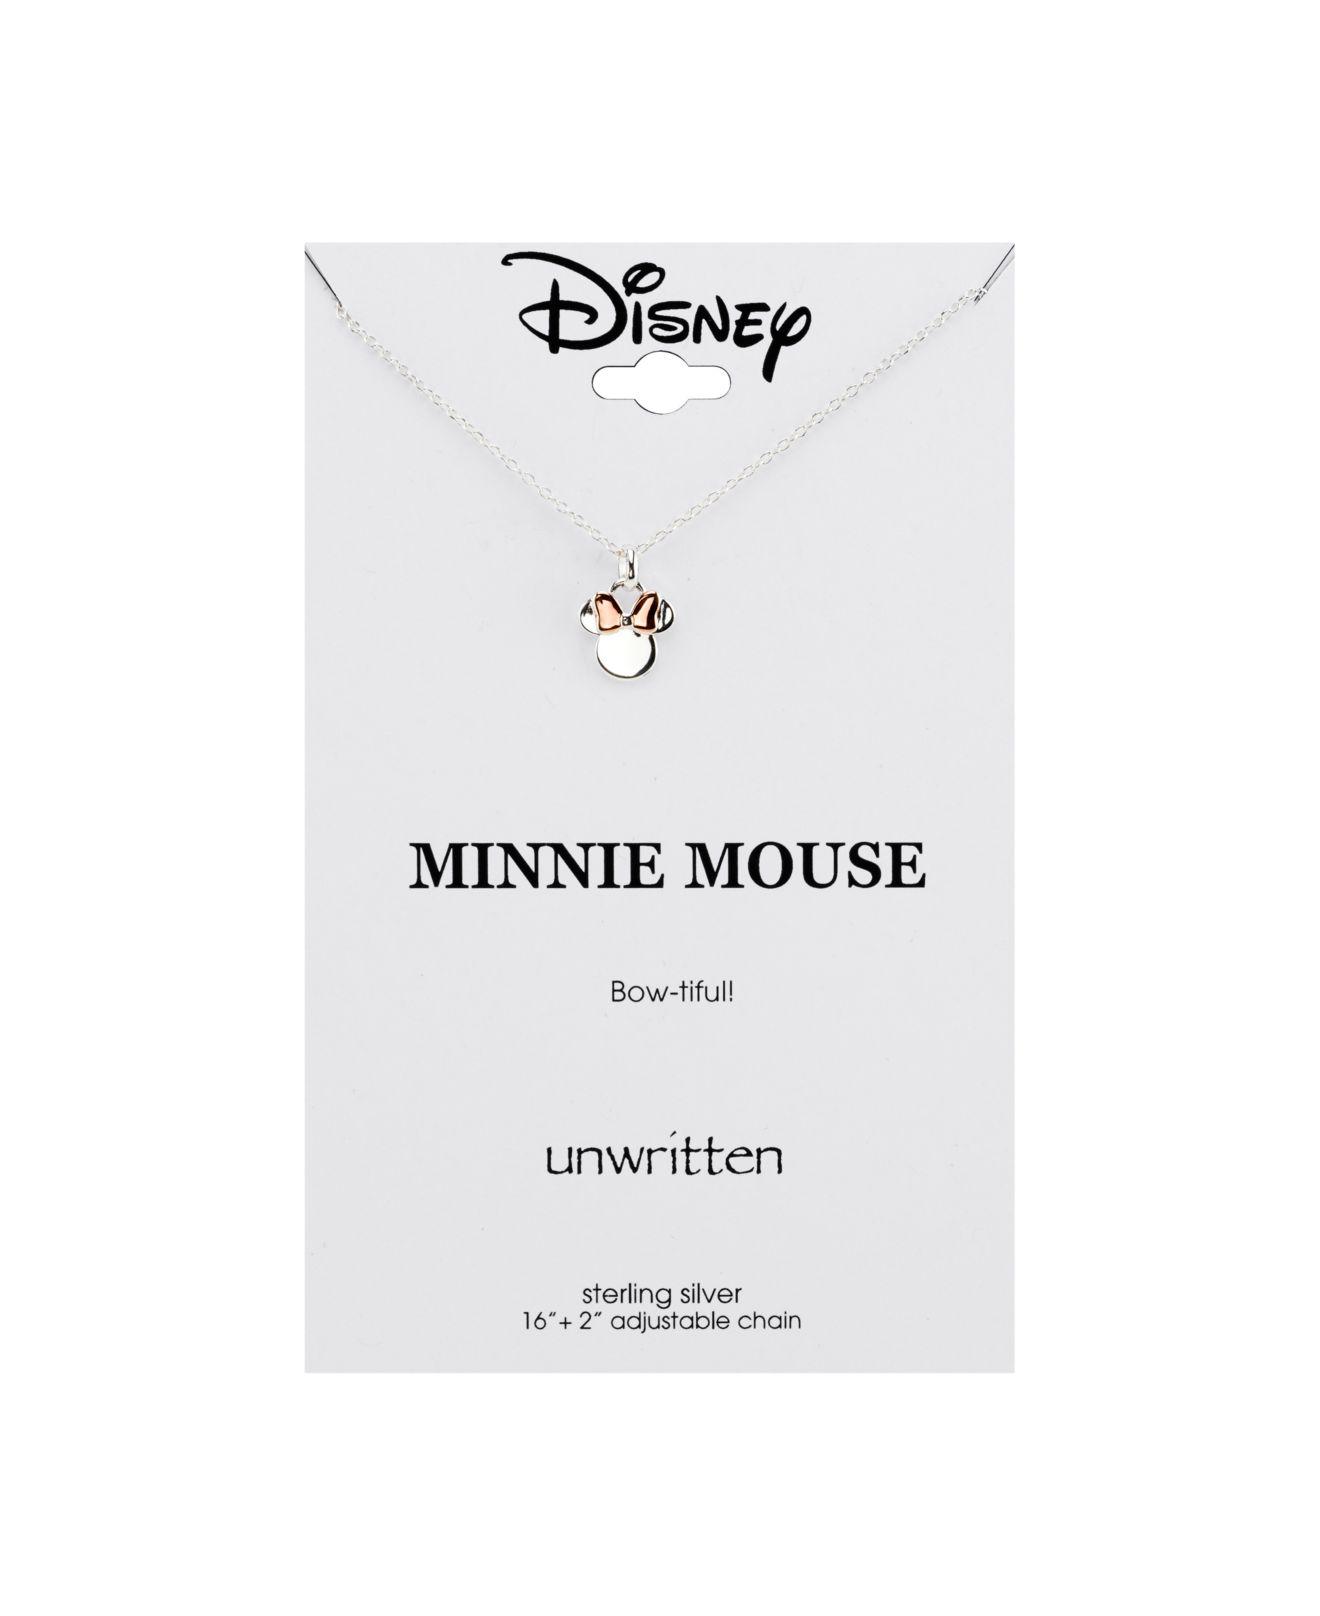 Disney 's Minnie Mouse Pendant Necklace For Unwritten In Sterling 